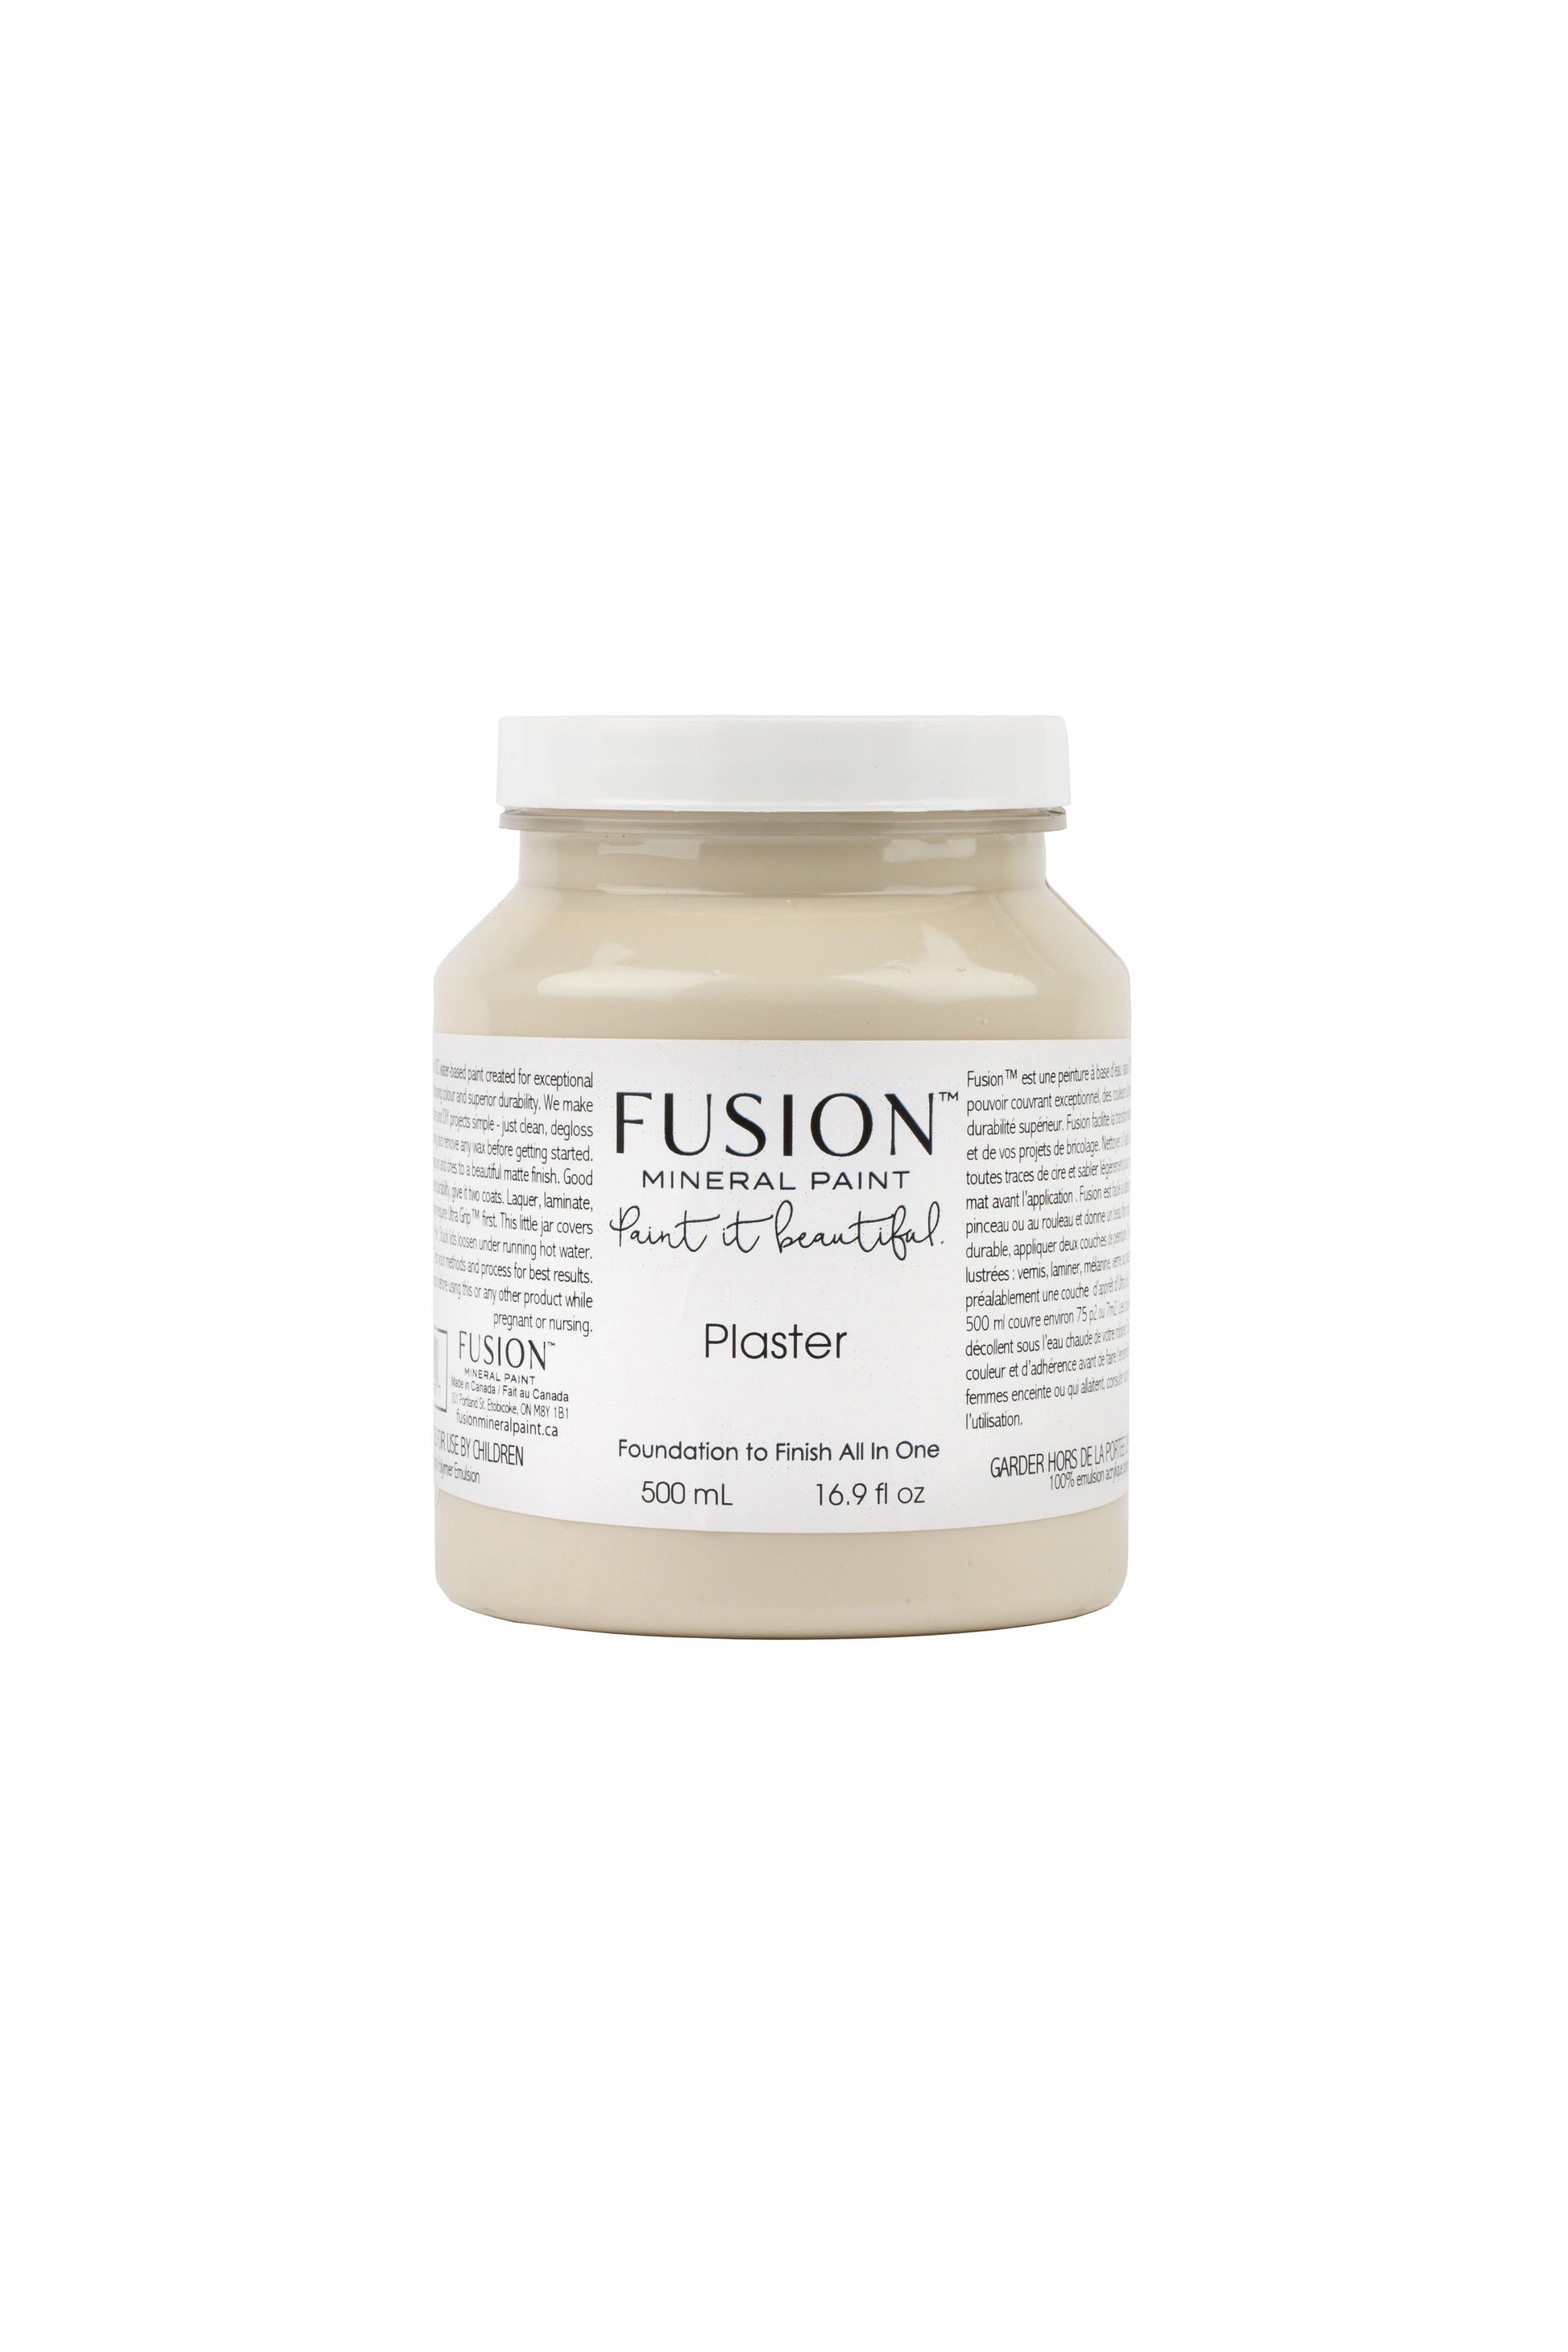 Bellwood - Fusion Mineral Paint Pint